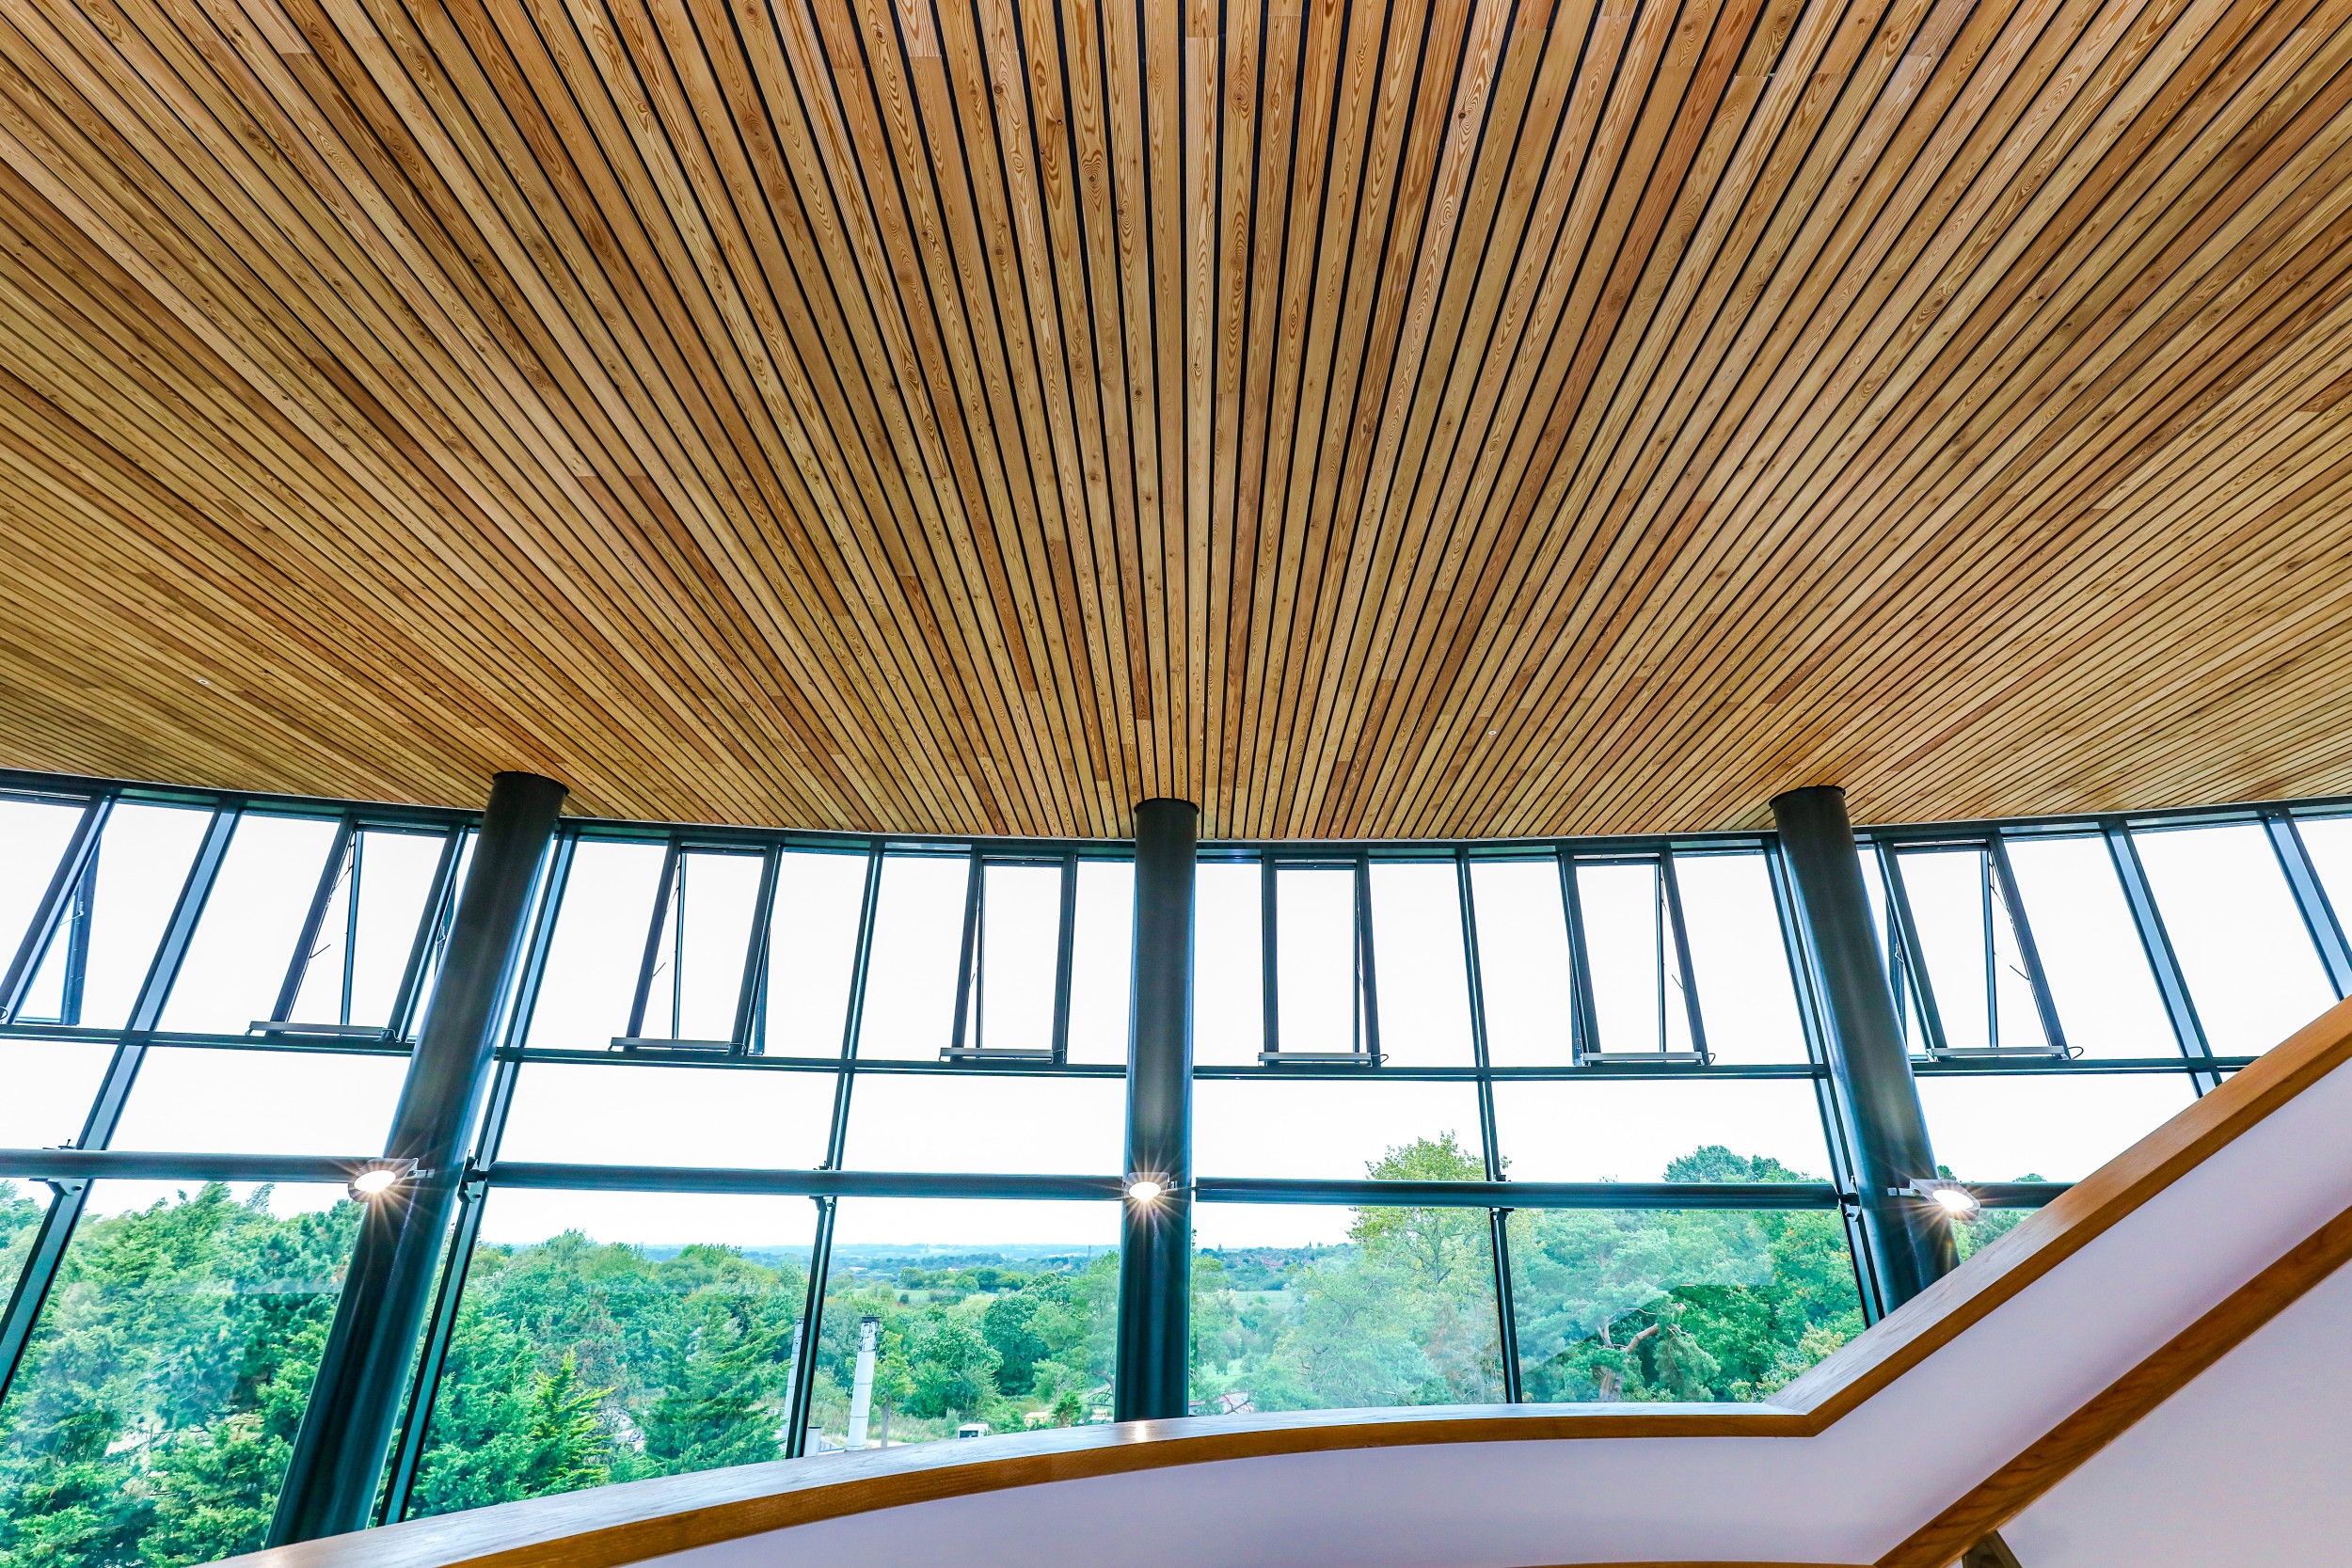 New hospital features centrepiece linear wood ceiling